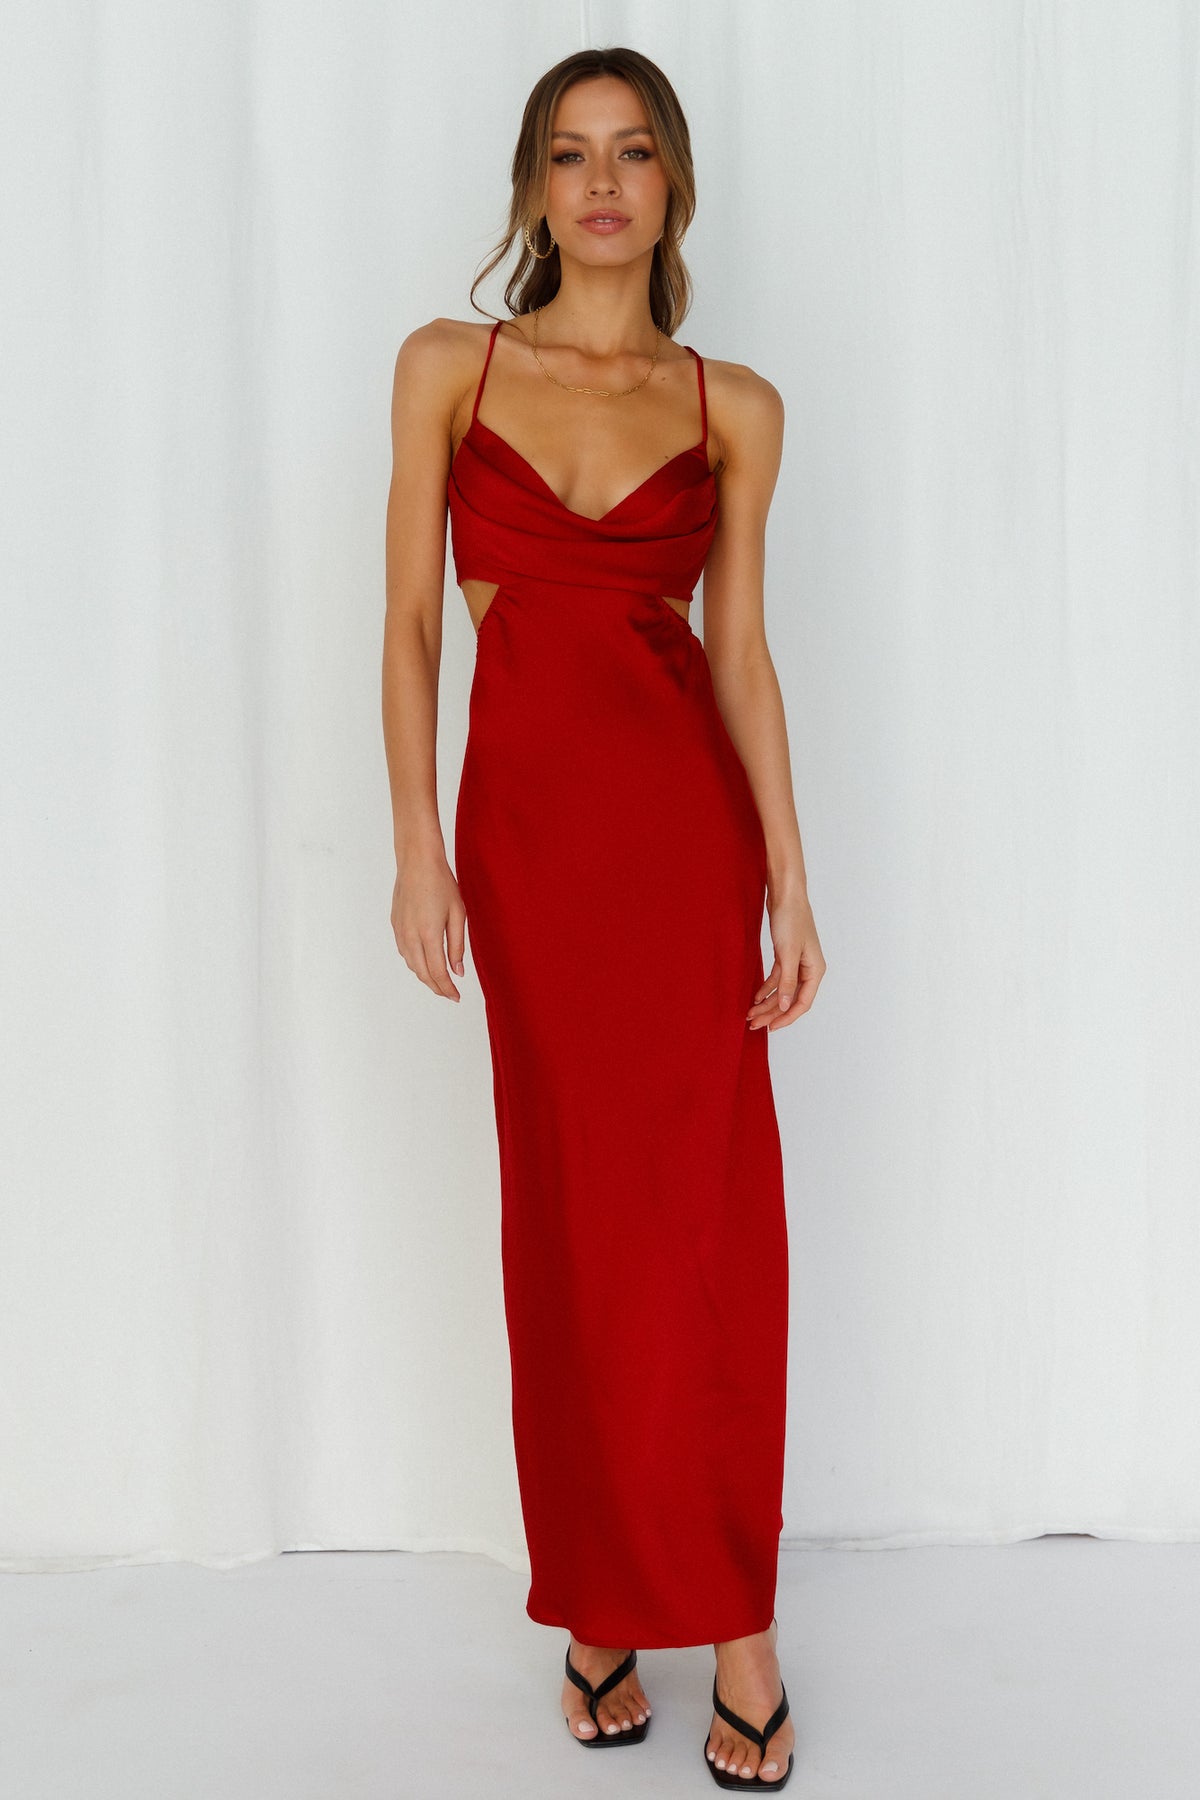 Shop Formal Dress - Angels In America Midi Dress Wine featured image